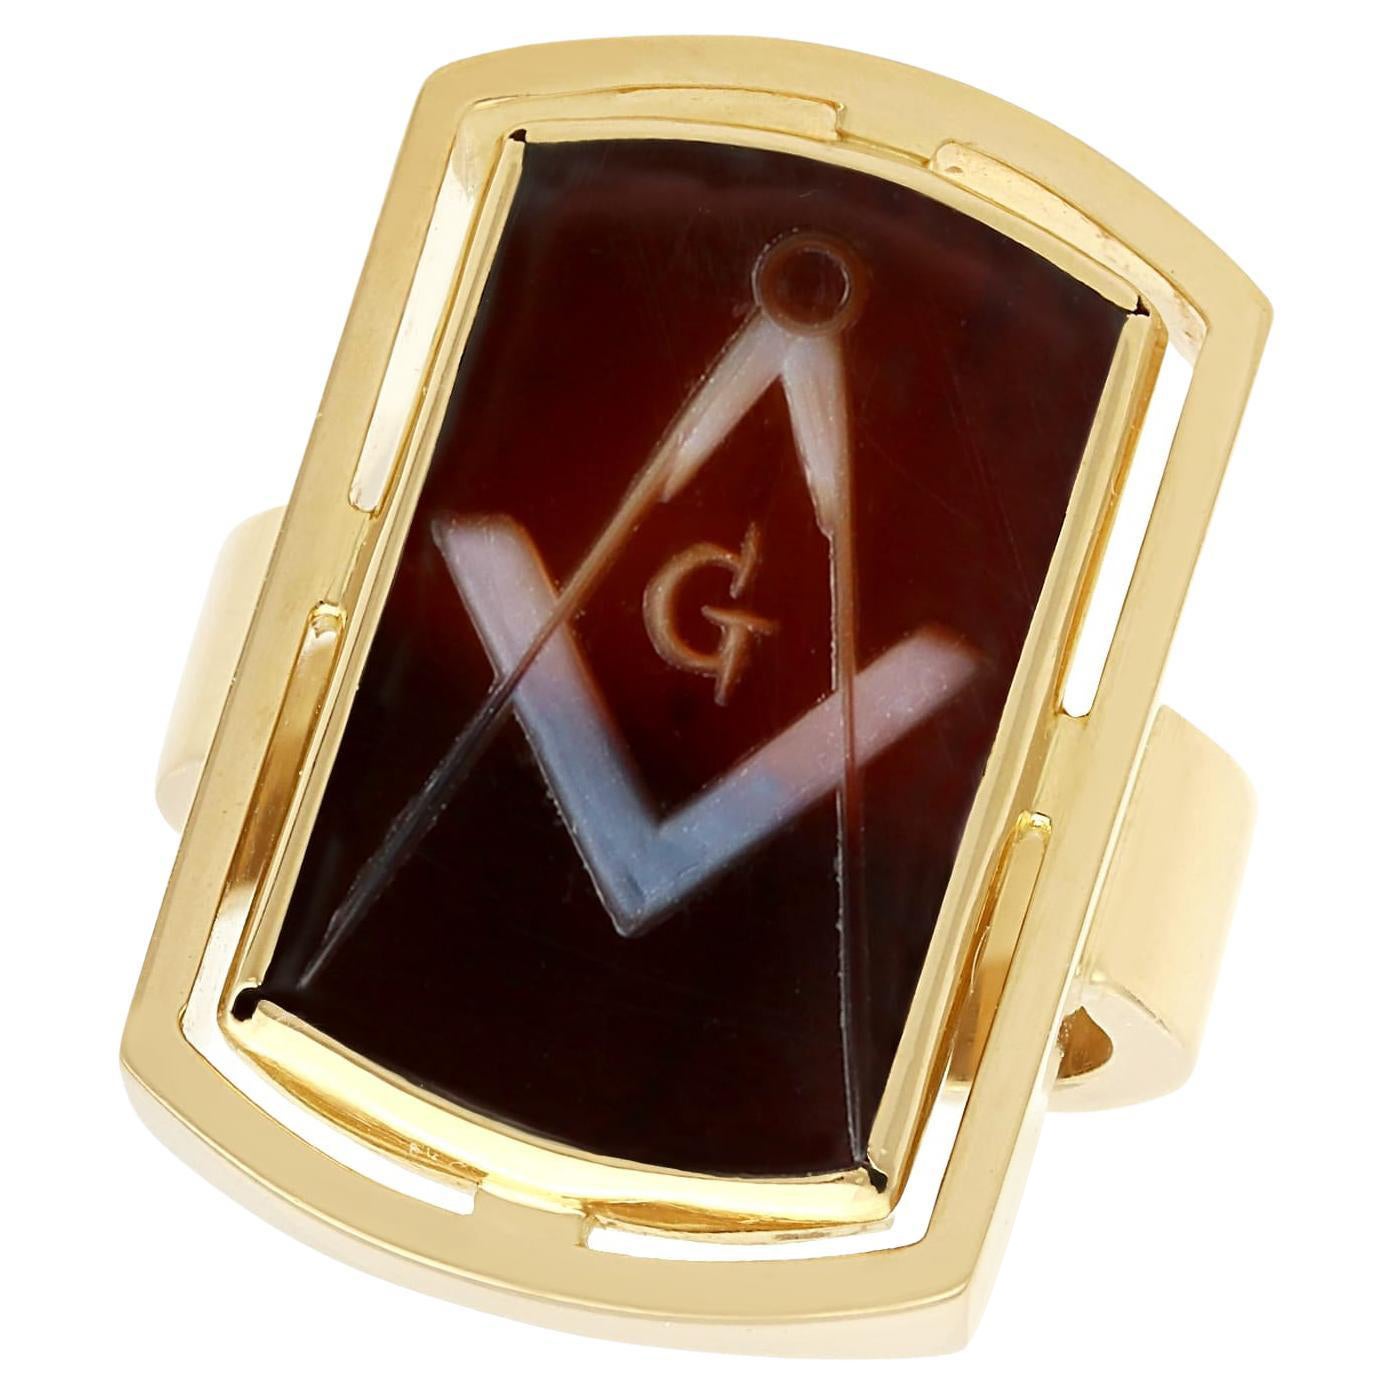 Vintage 3.31ct Agate and Yellow Gold Masonic Ring, Circa 1950